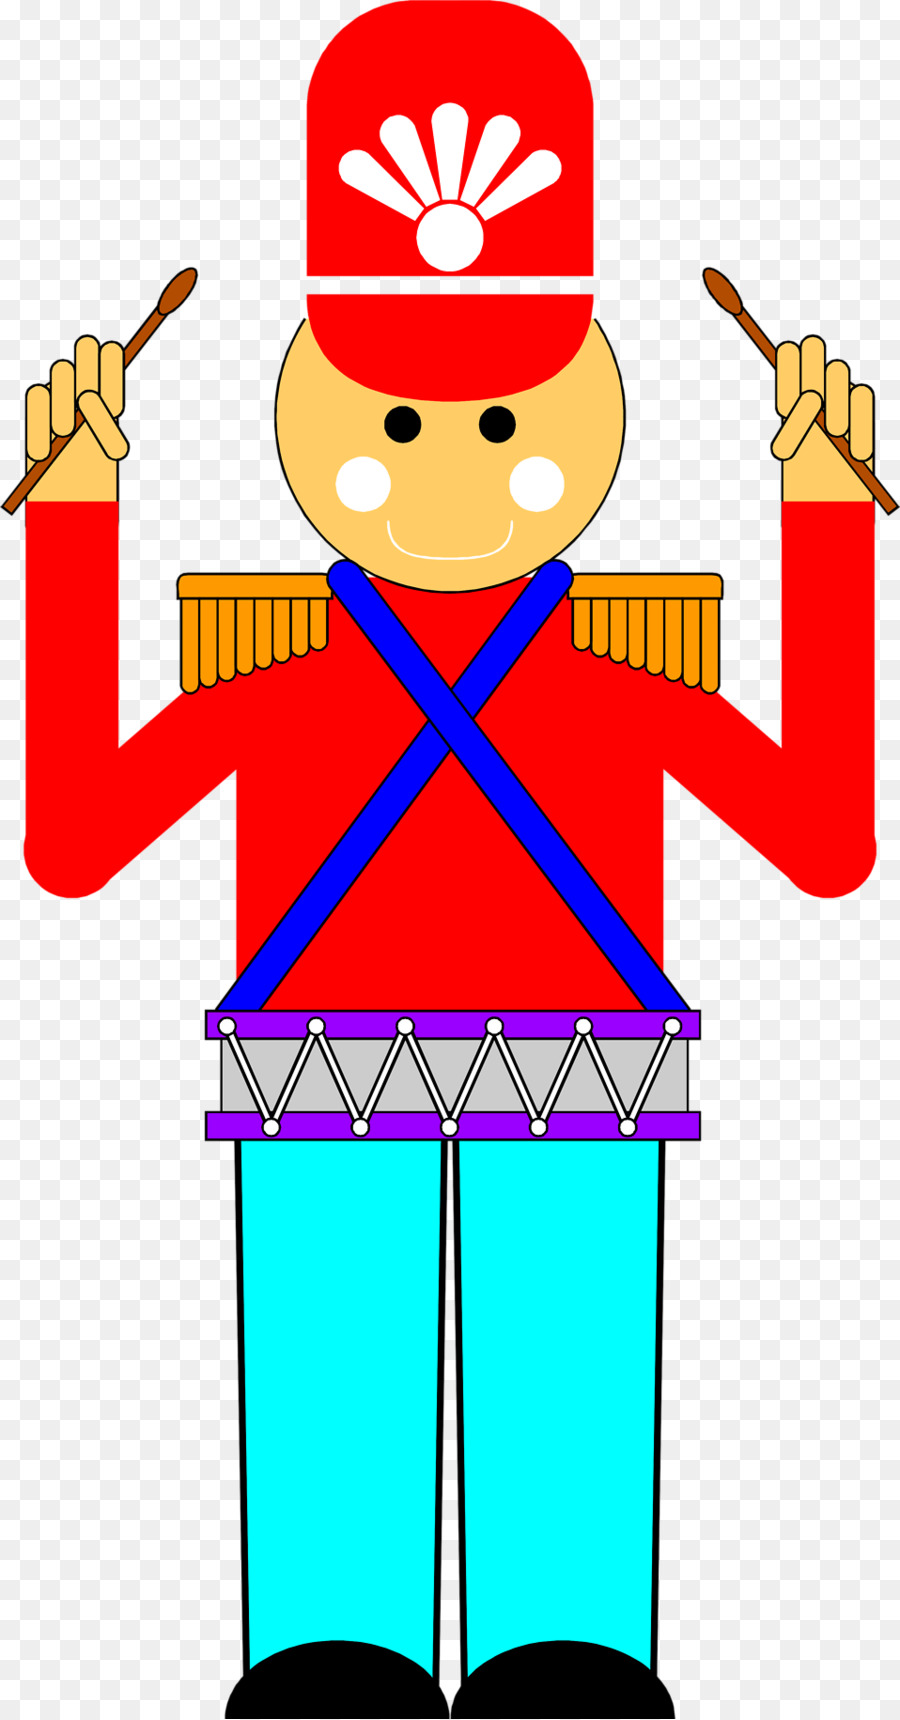 Toy soldier Nutcracker doll Clip art - Soldier png download - 958*1830 - Free Transparent Toy Soldier png Download.